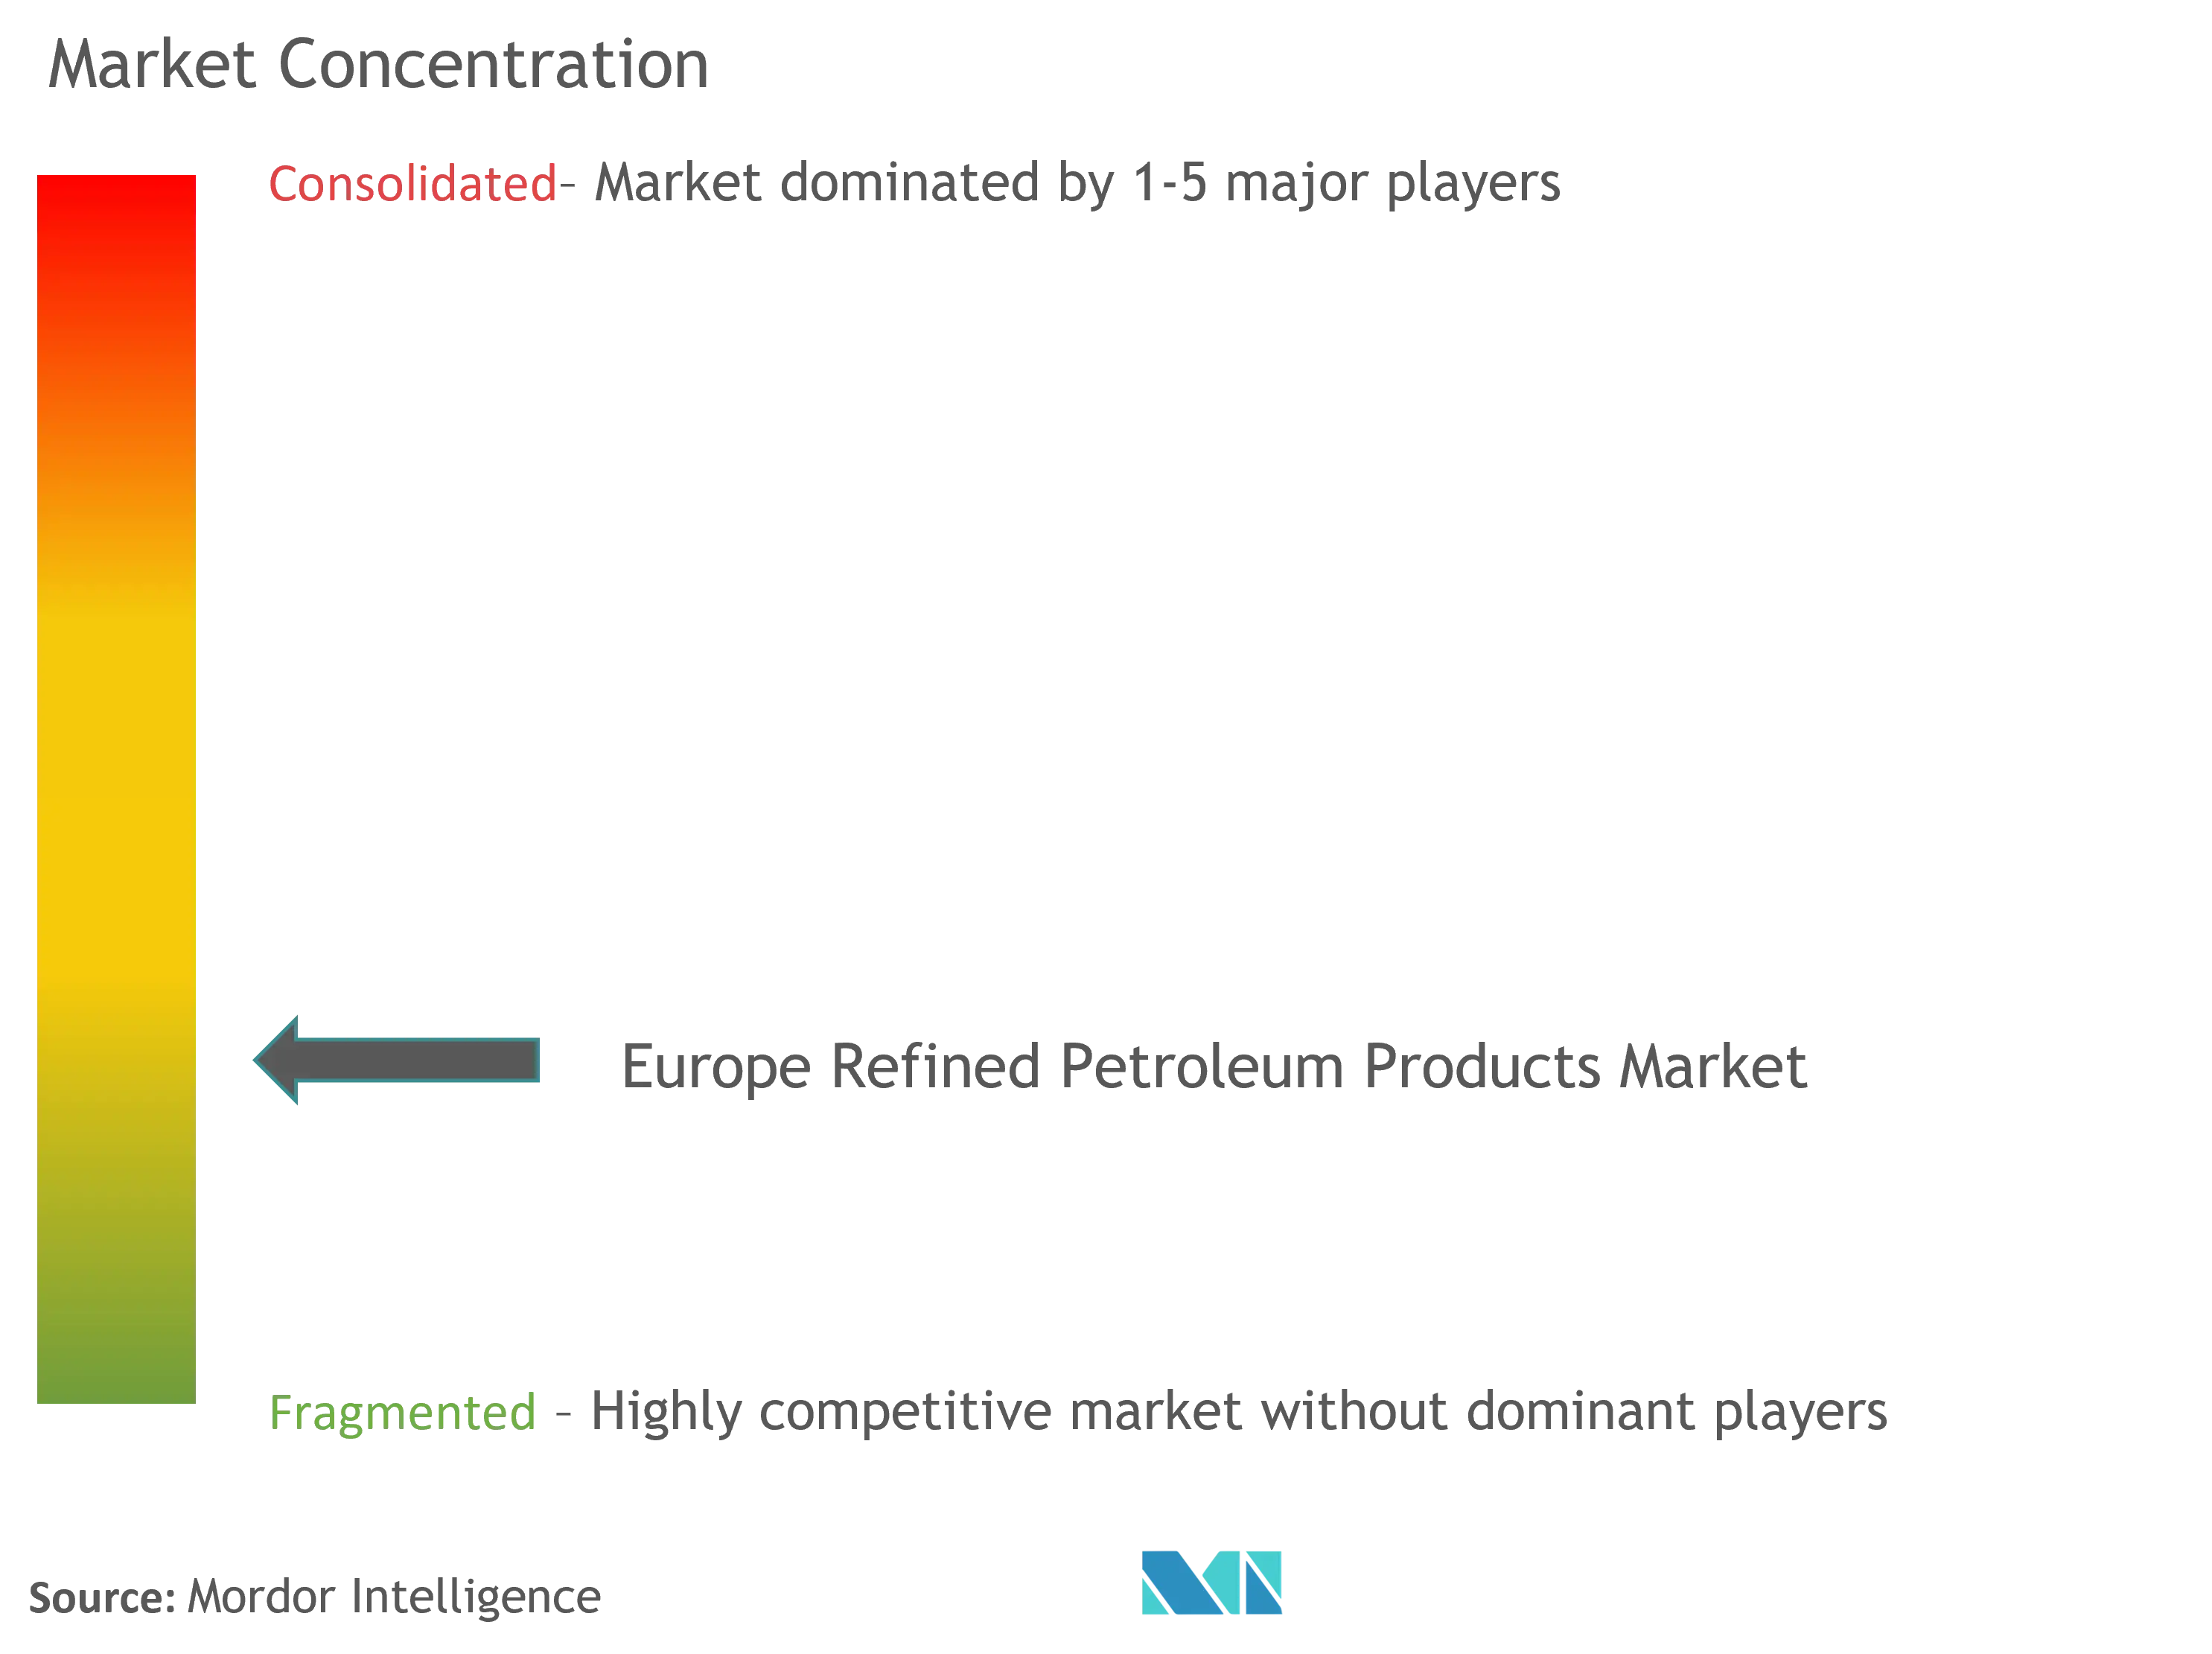 Europe Refined Petroleum Products Market Concentration